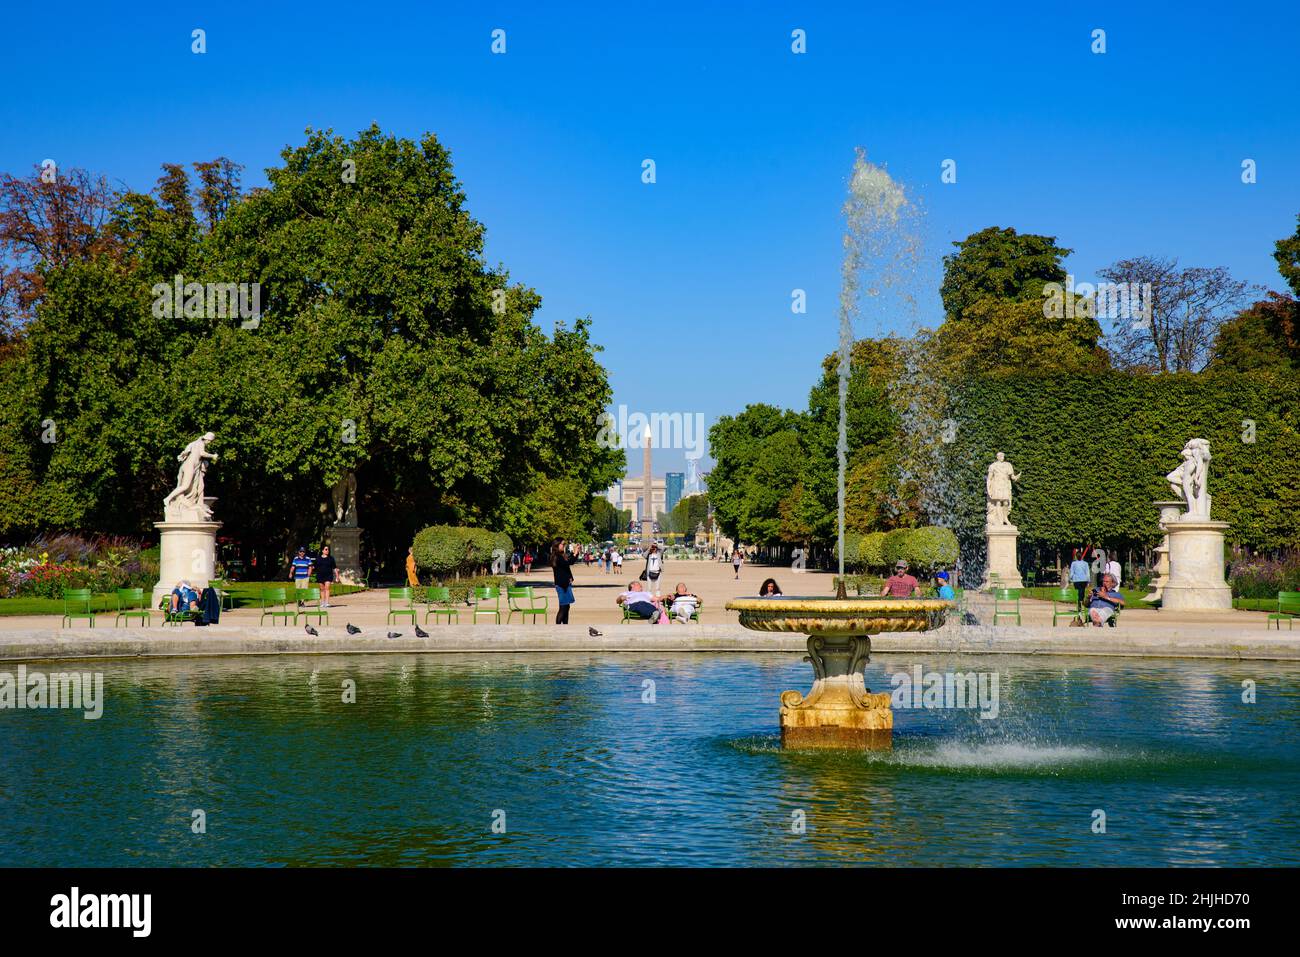 Tuileries Garden, located between the Louvre and the Place de la Concorde, in Paris, France Stock Photo